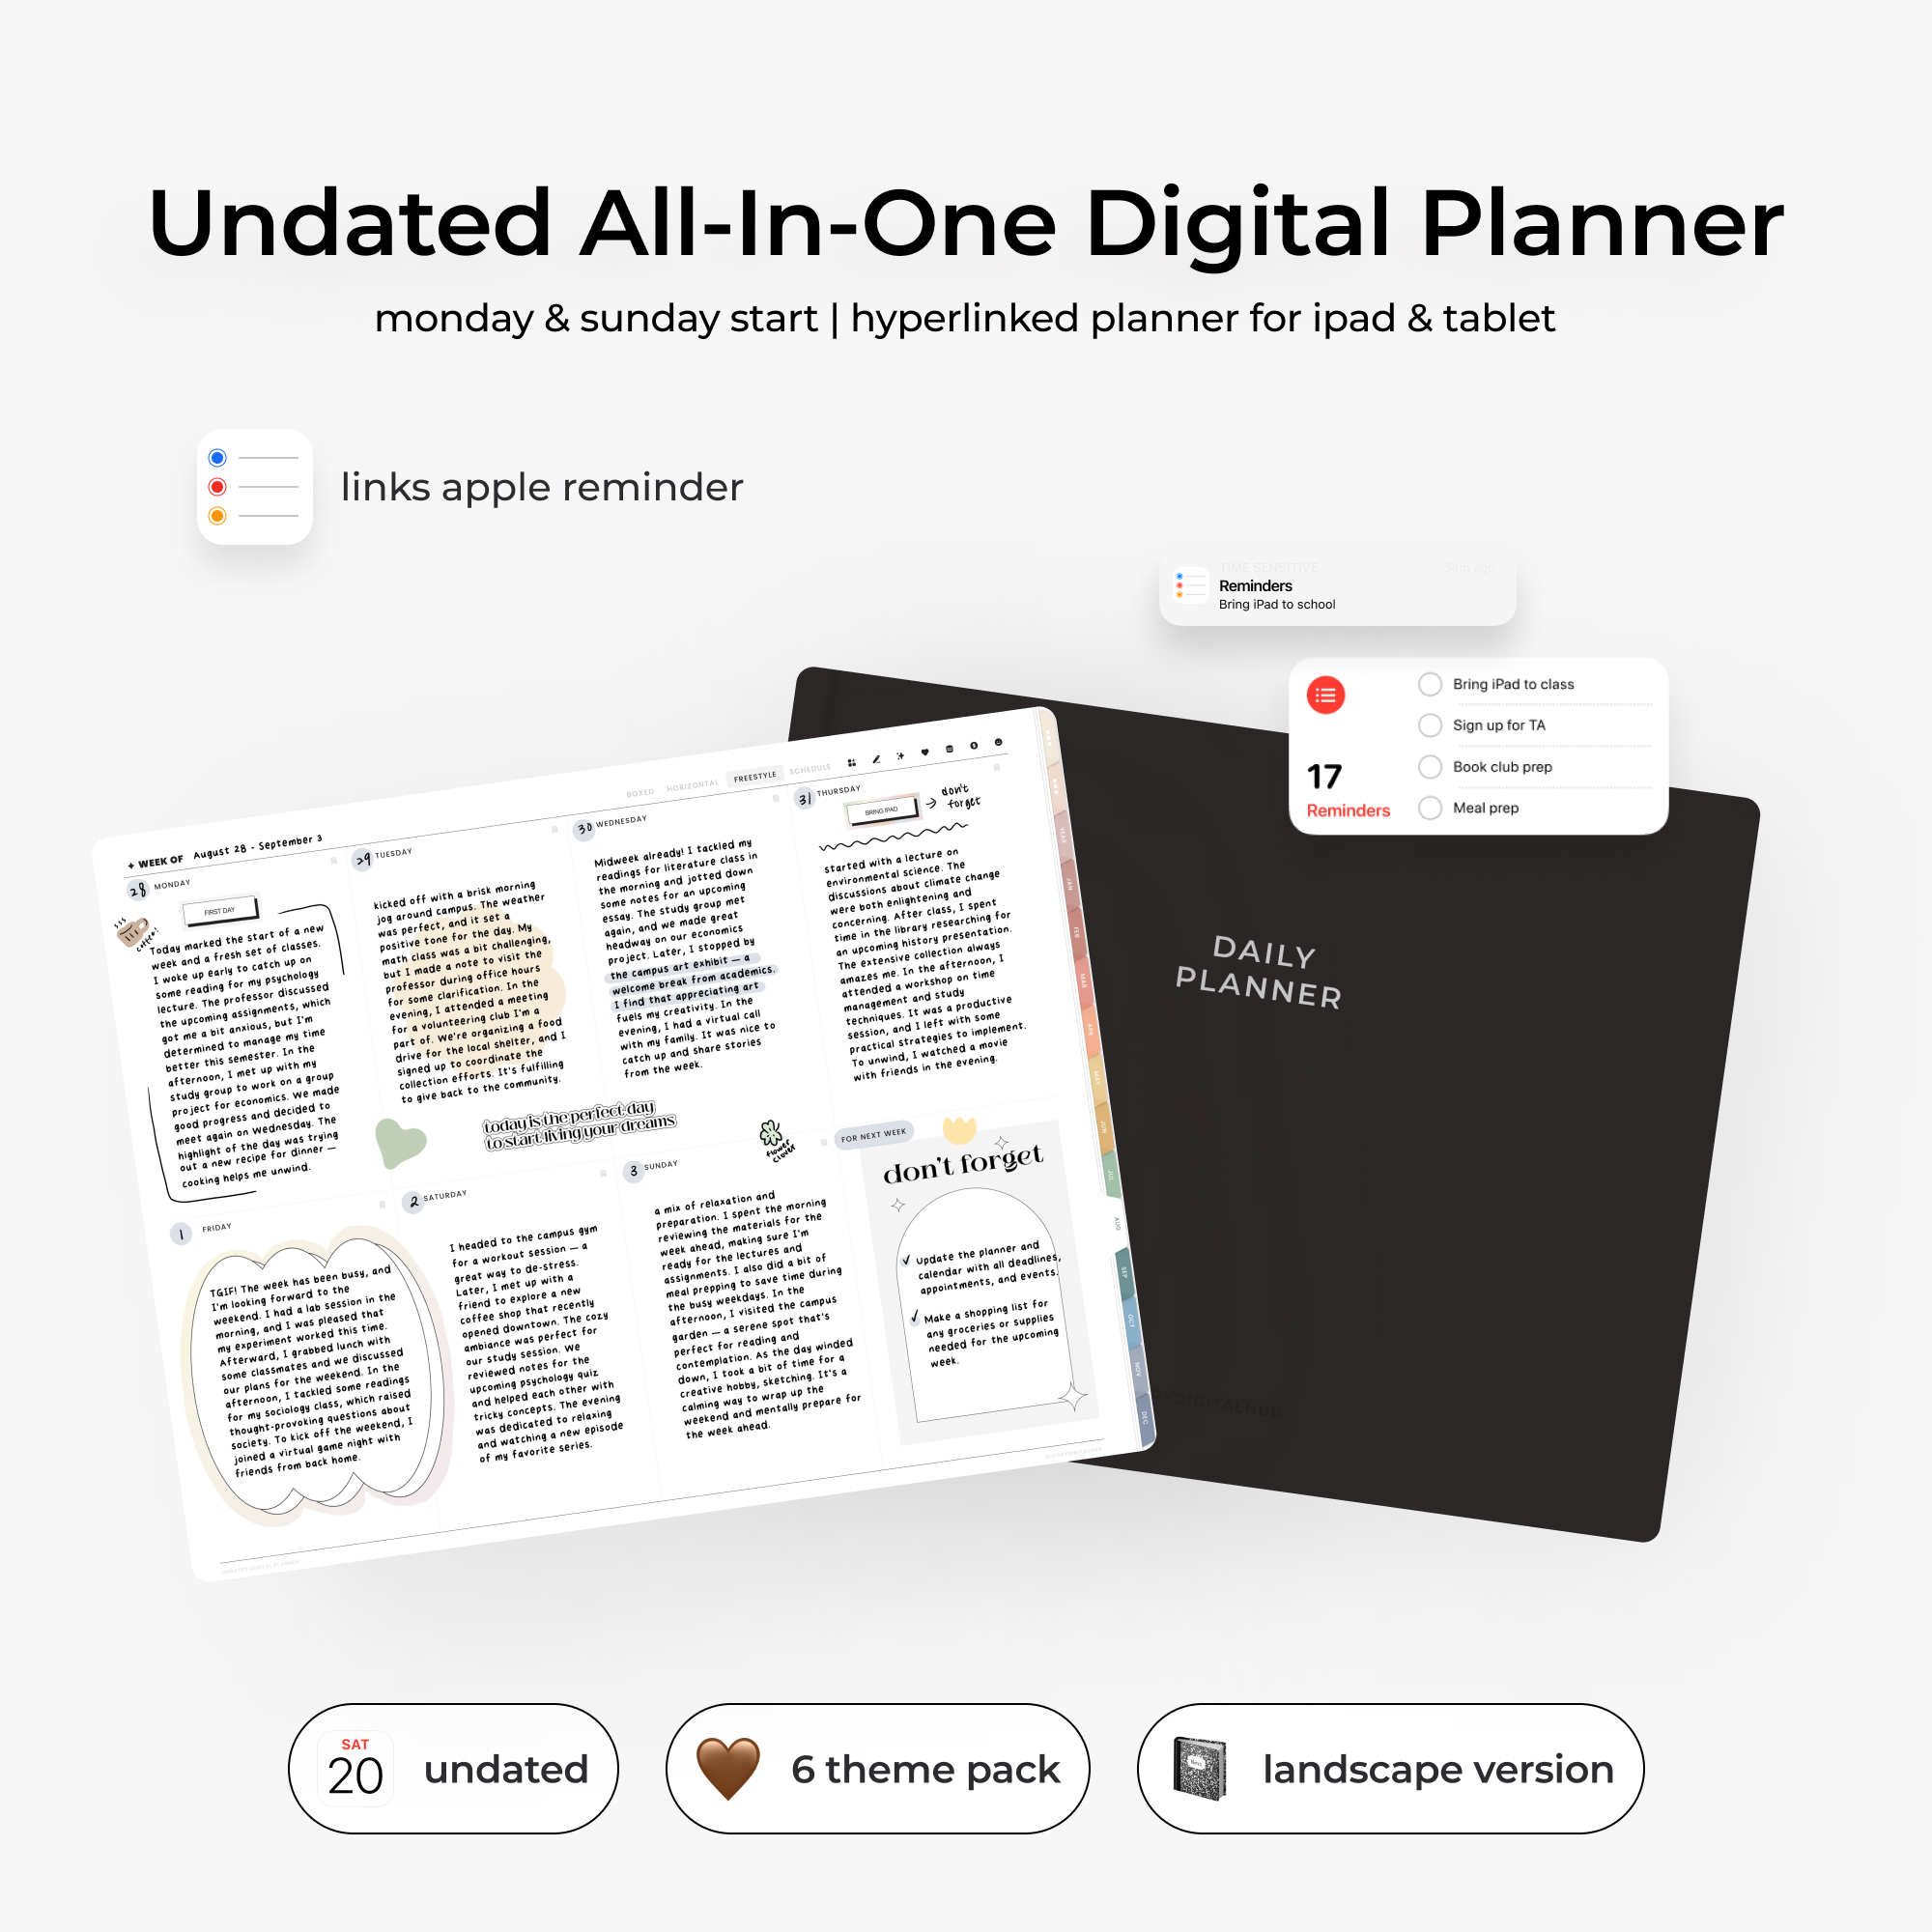 Undated All-in-One Digital Planner - Landscape